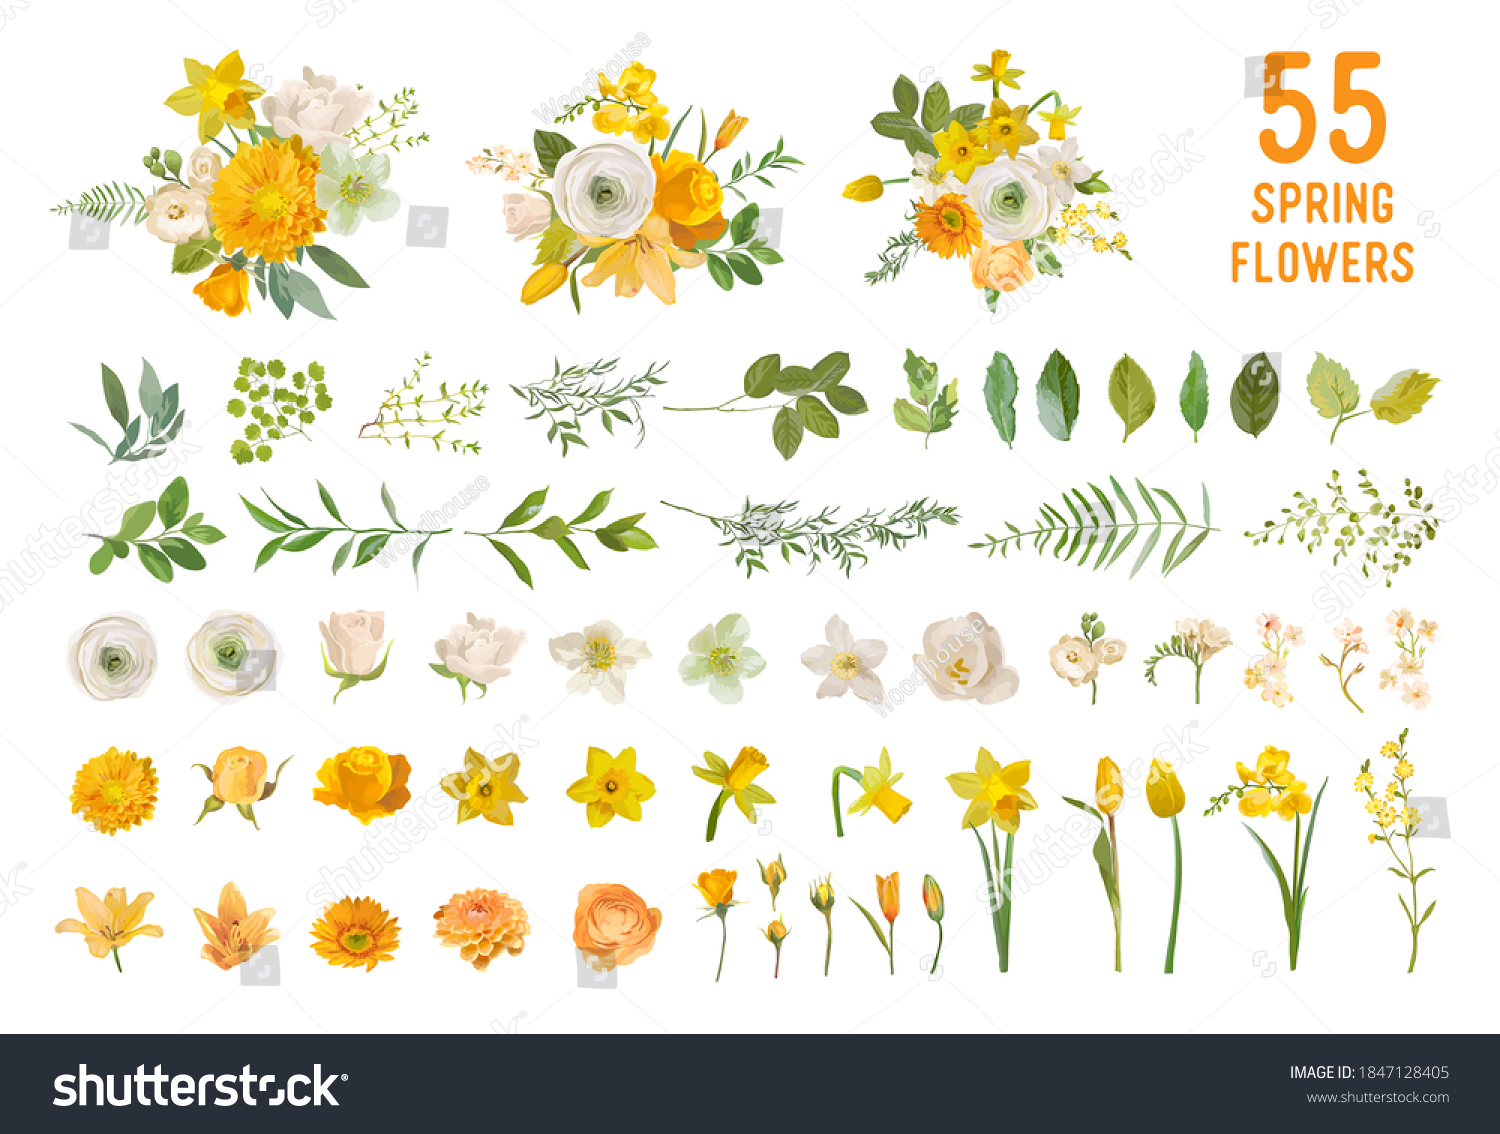 SVG of Spring garden flowers, yellow daffodil, mustard rose, white fresia, eucalyptus, greenery, fern. Vector design isolated elements set. Wedding summer bouquet collection for decoration, invitation, cover svg